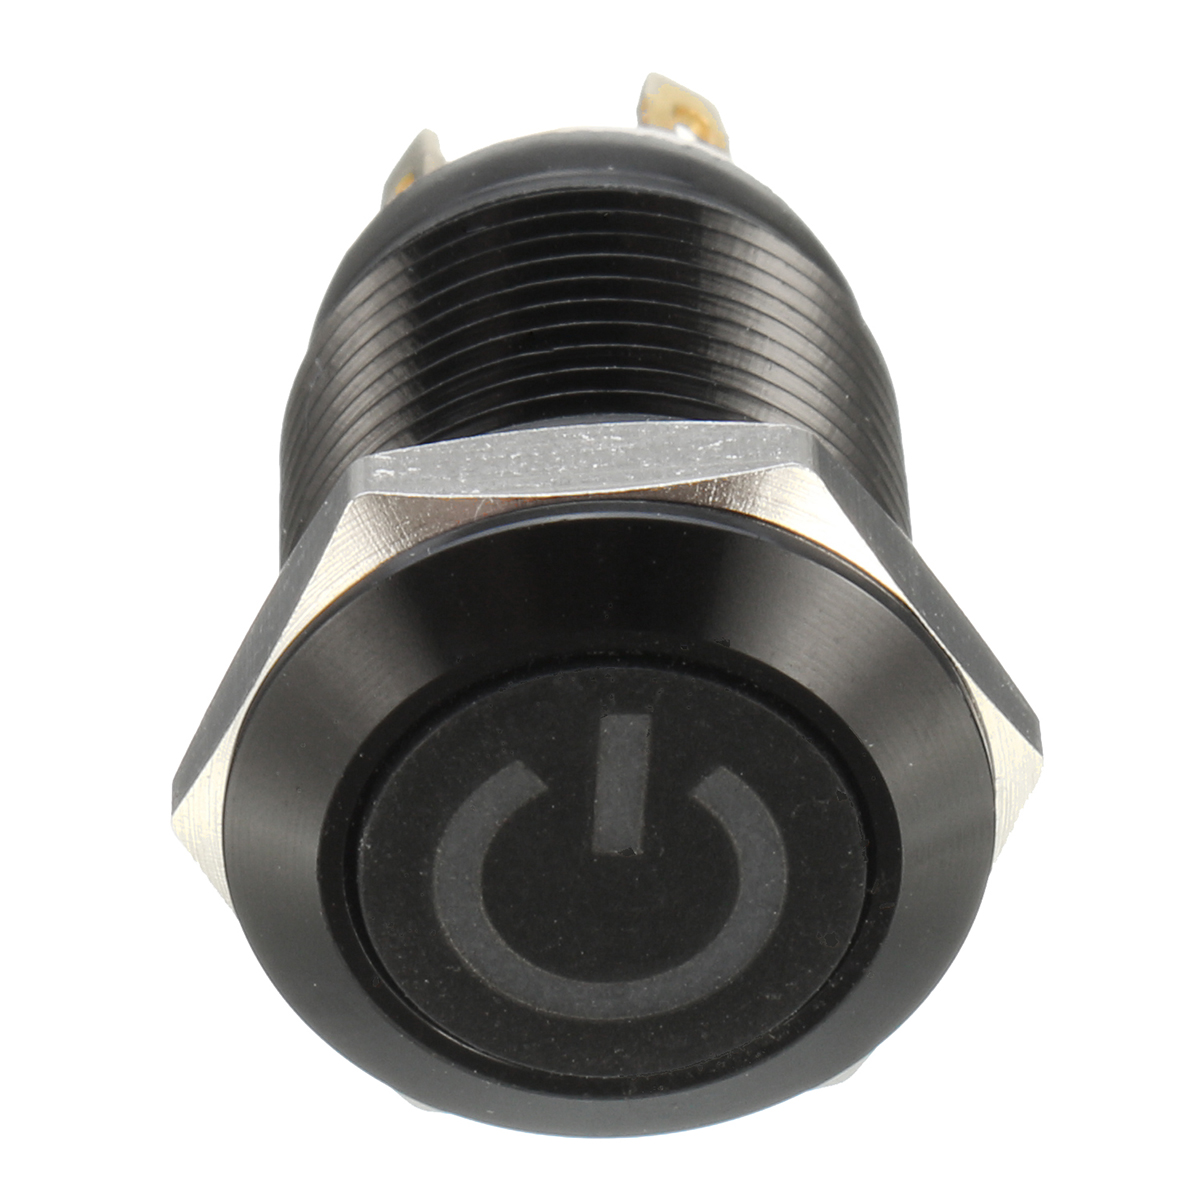 12V 4 Pin 12Mm LED Metal Push Button Momentary Power Switch Waterproof